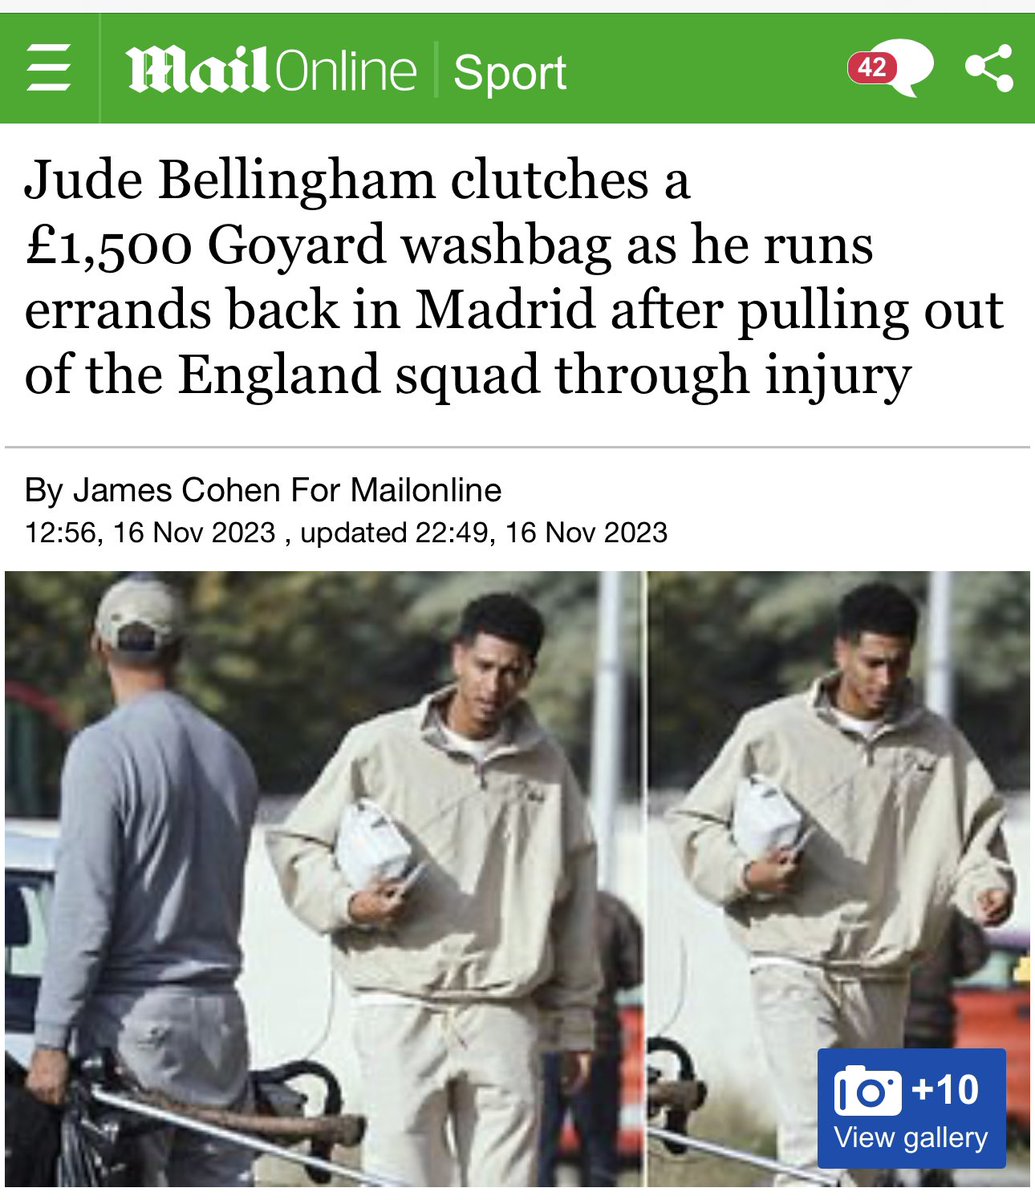 Daily Mail editor: “it’s a black footballer make sure you include the price of something…”